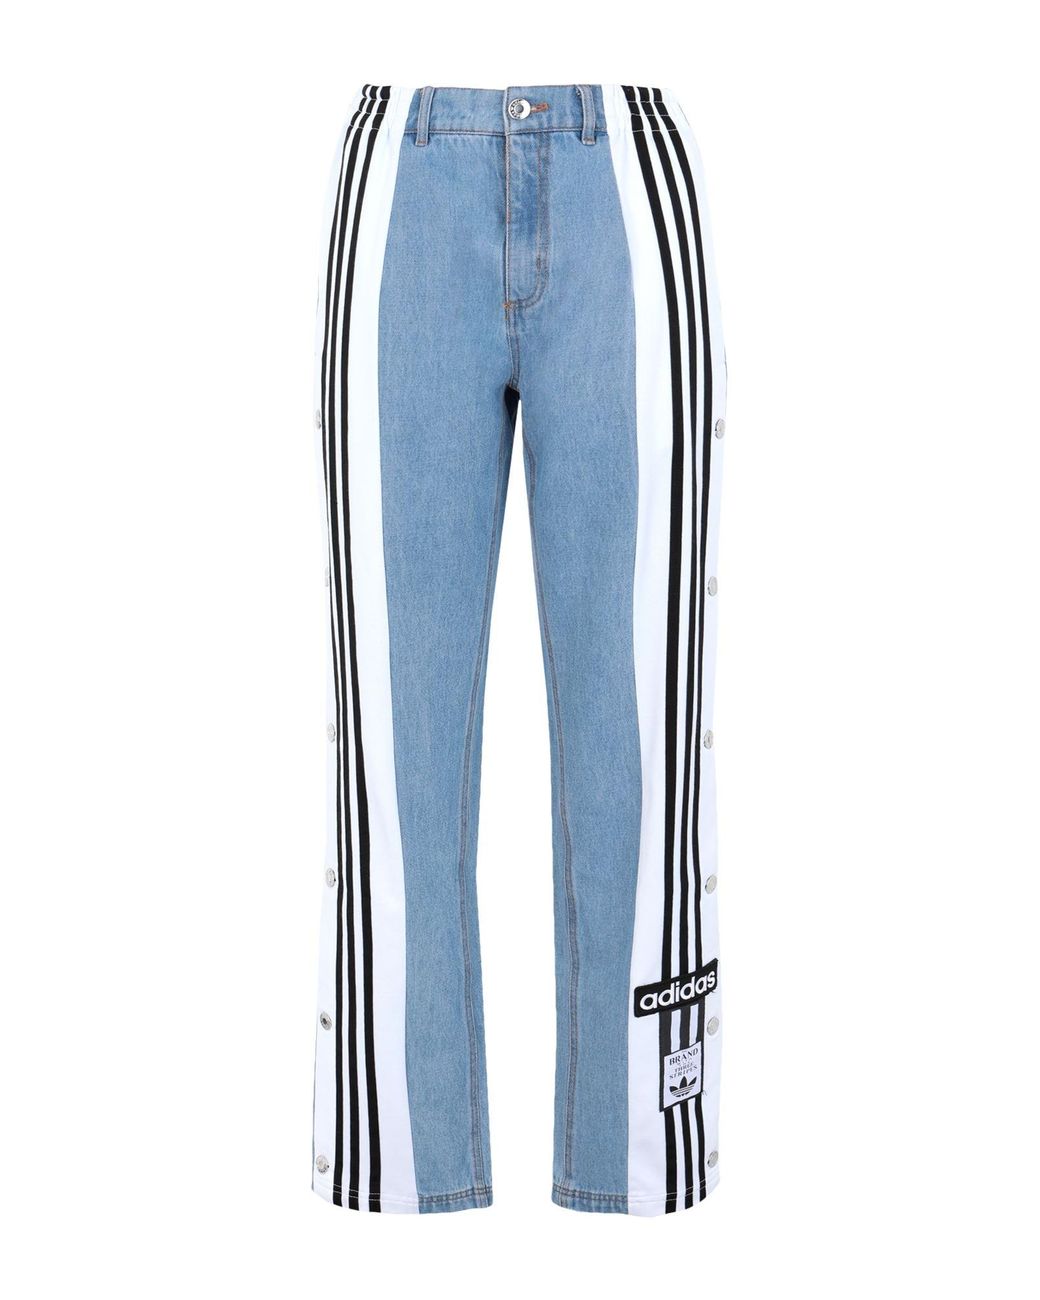 Pants and jeans adidas Originals Nice Chino Pant Legend Ink | Footshop